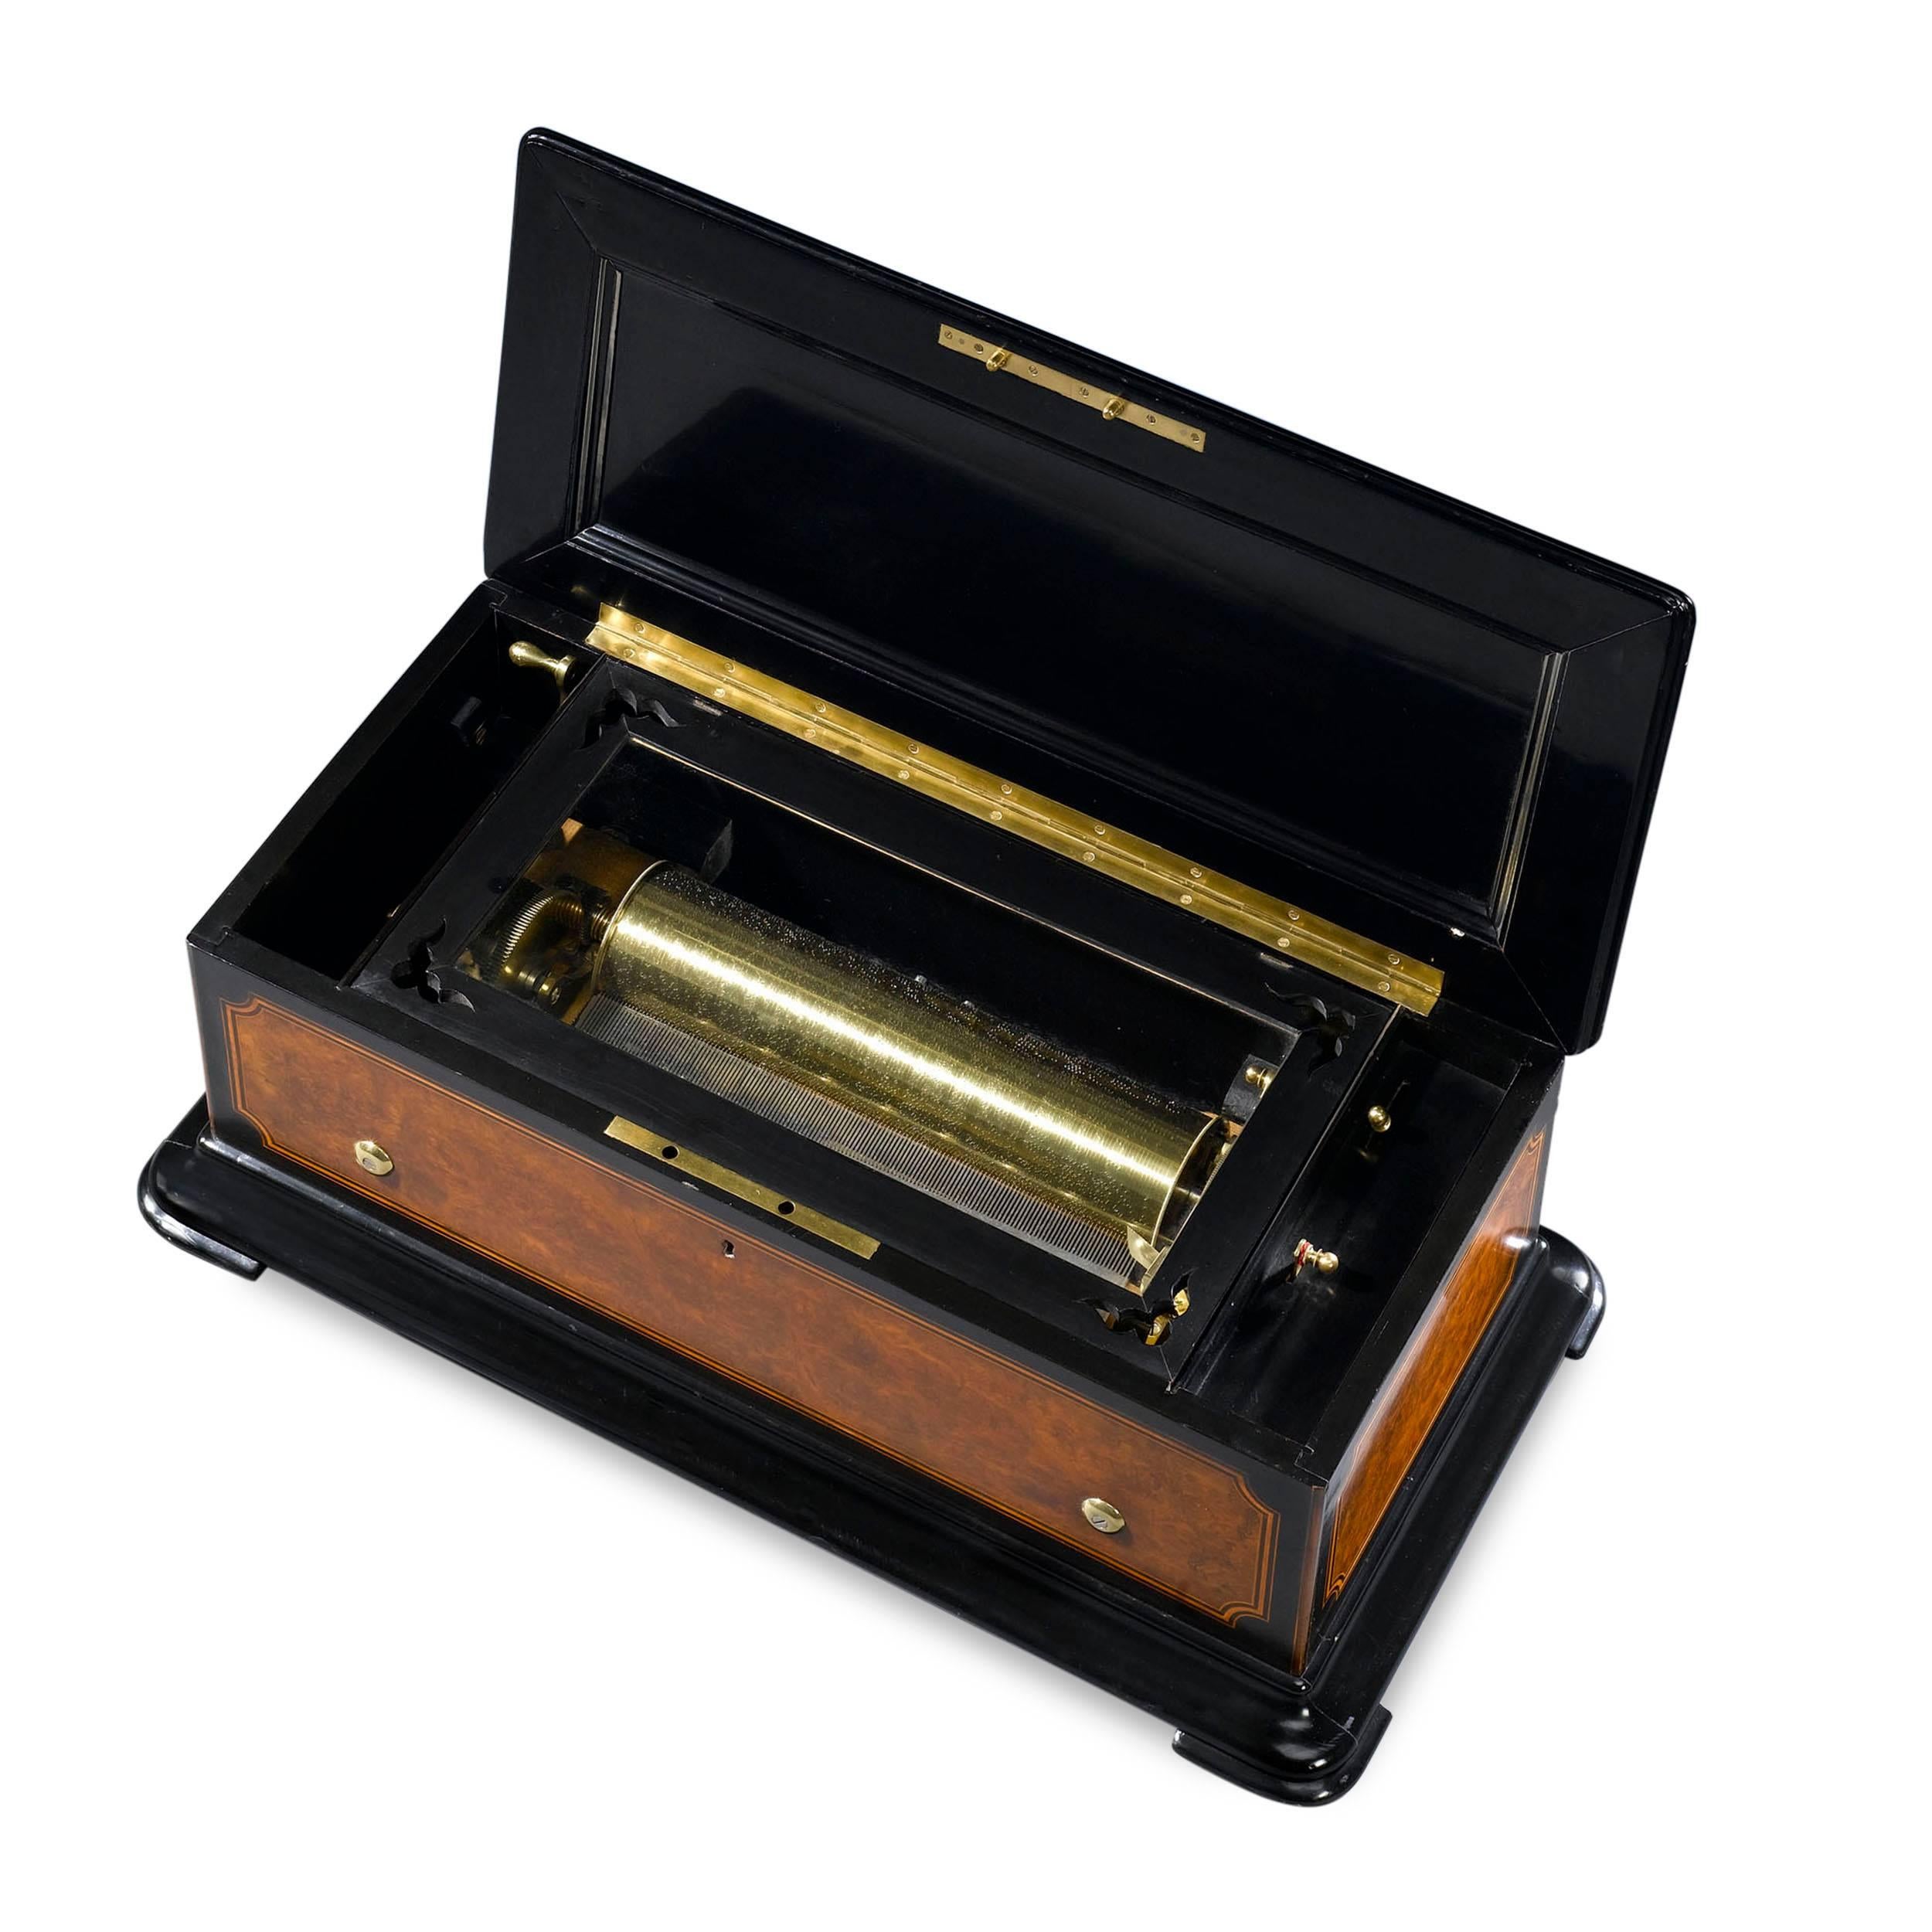 This music box manufactured by Brémond, one of the most respected and talented makers of the era, demonstrates not just beauty and technical excellence, but sheer musical mastery. The outer case boasts a burr-walnut veneer with ebony borders and